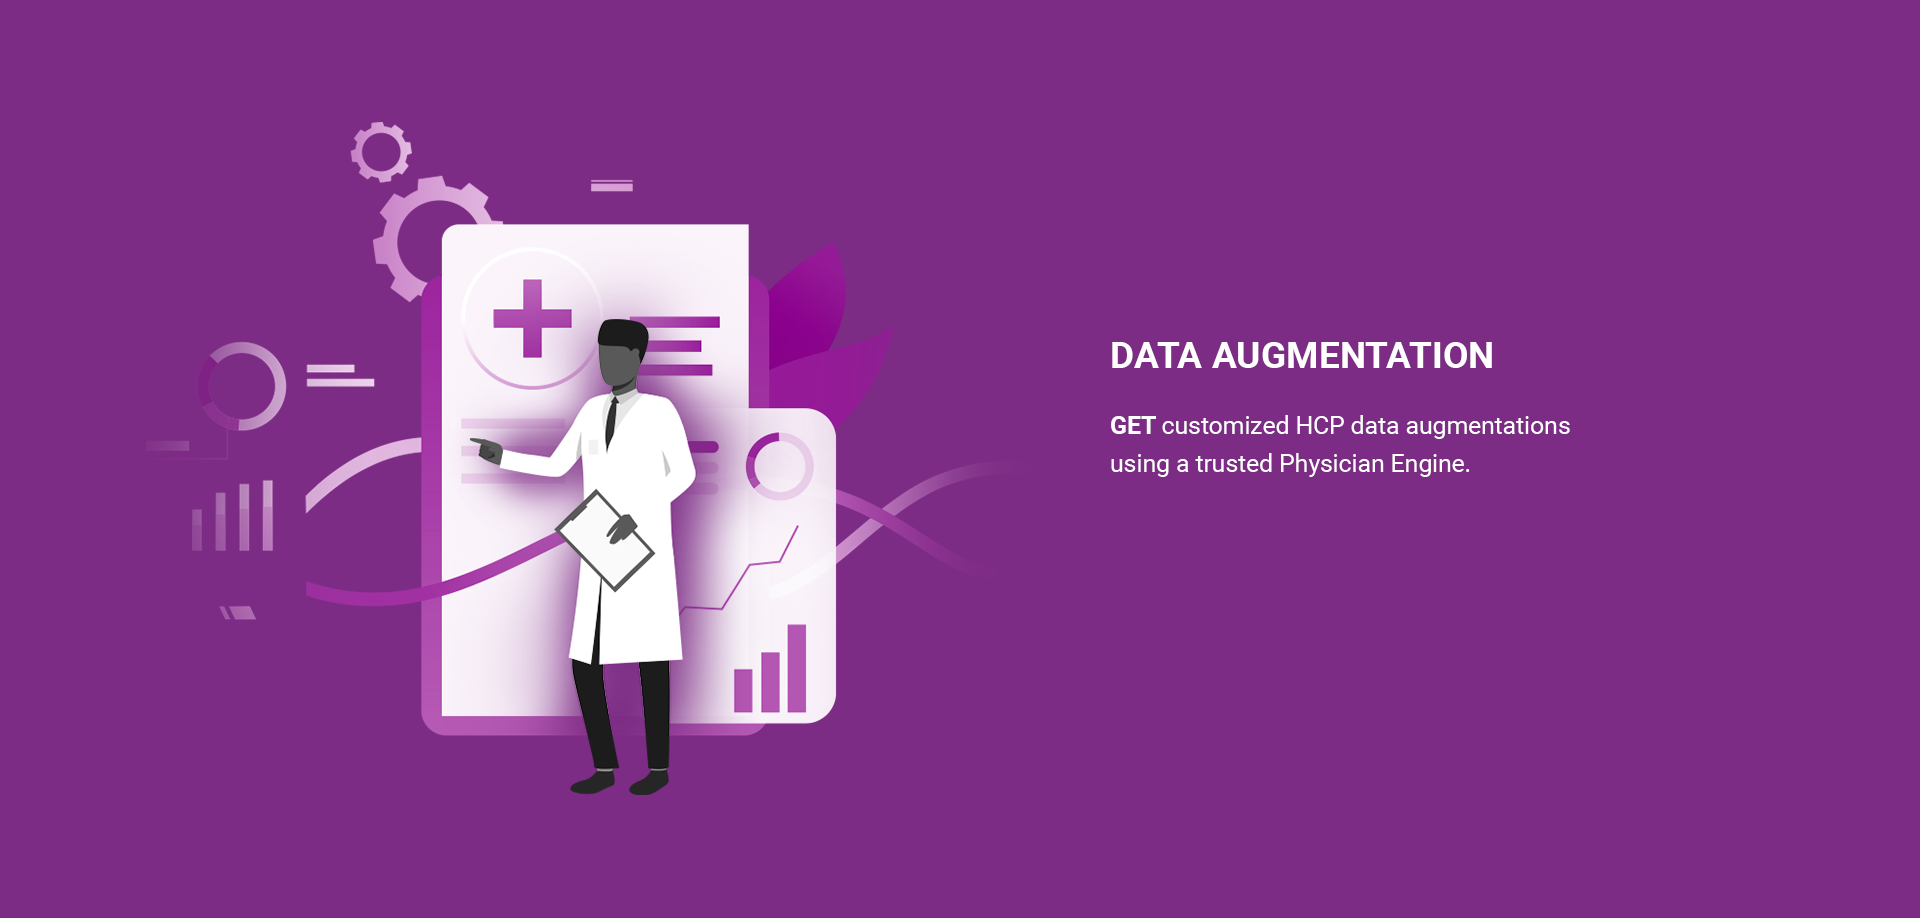 Purple graphic showcasing a healthcare professional with medical tools and data visuals, complemented by the text "DATA AUGMENTATION."